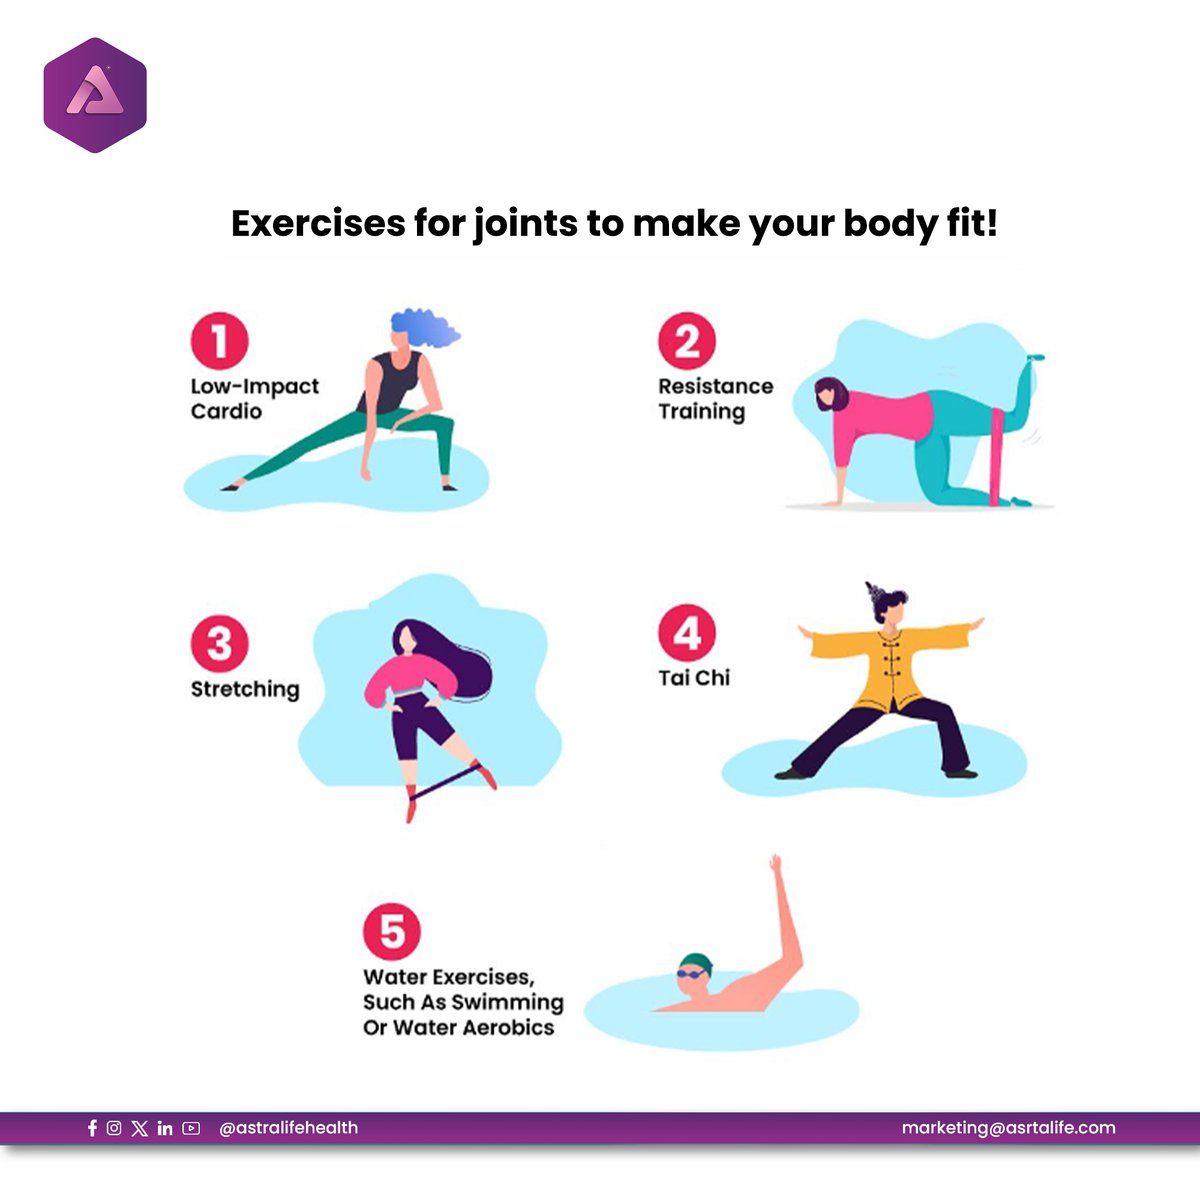 Boost your joint health and stay fit with these exercises!

#astralife #astralifehealth #astralifehealthcare #medicaleducation #healthcare #HealthcareInnovation #HealthcareUnfiltered